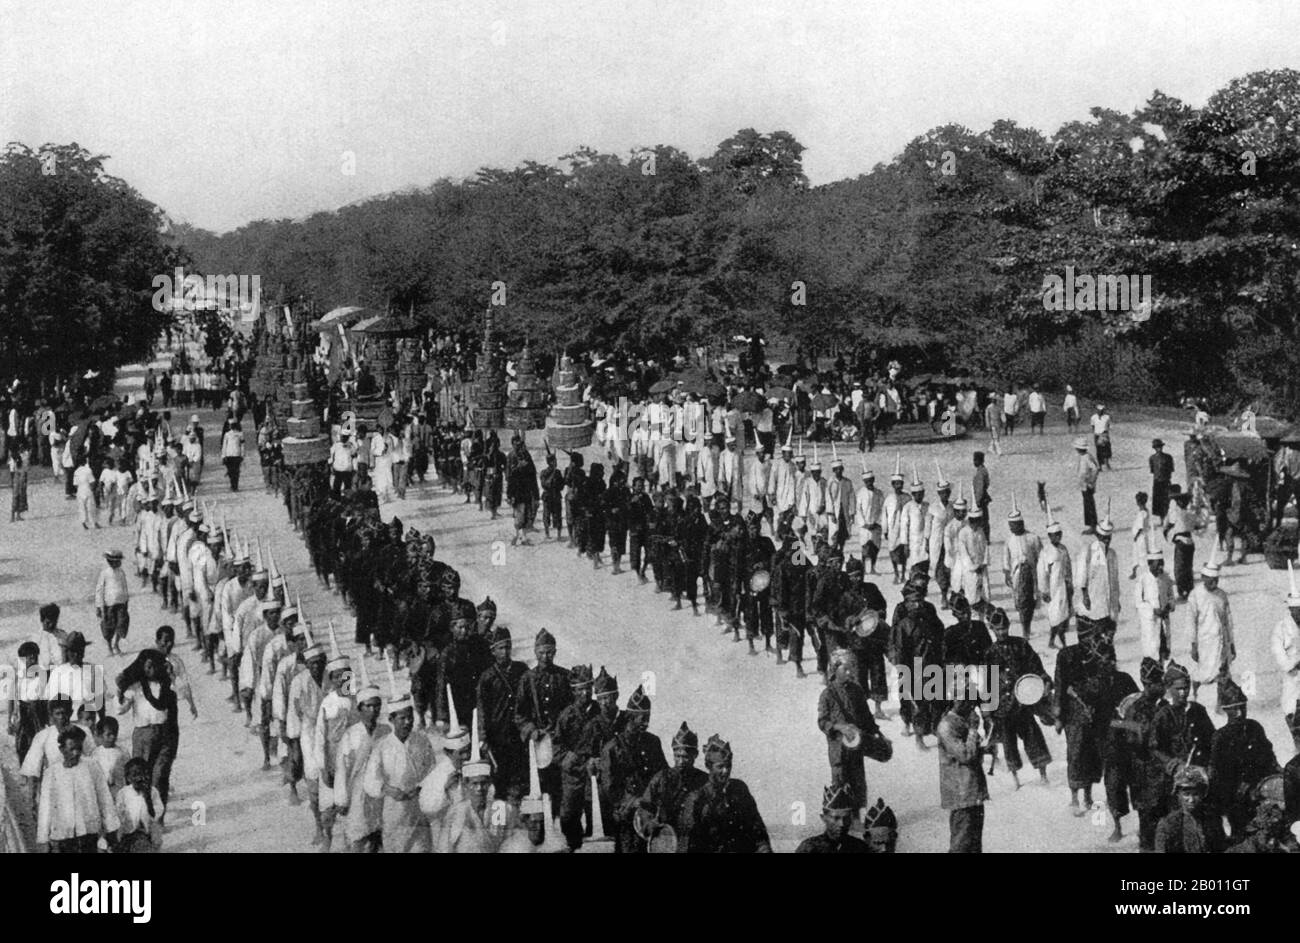 Thailand: A funeral procession accompanies the urn carrying the ashes of Prince Uruphong in Bangkok in 1909.   Elaborate pavilions and Buddhist temples are traditionally constructed especially for royal funerals in Siam. The body of the deceased was embalmed and preserved while the cremation site was built. Funereal rites and a period of mourning could take months or even a year before the funeral took place. The embalmed body was then placed in a kneeling position in a gold urn on a high bier inside an ornate edifice to be cremated. Stock Photo